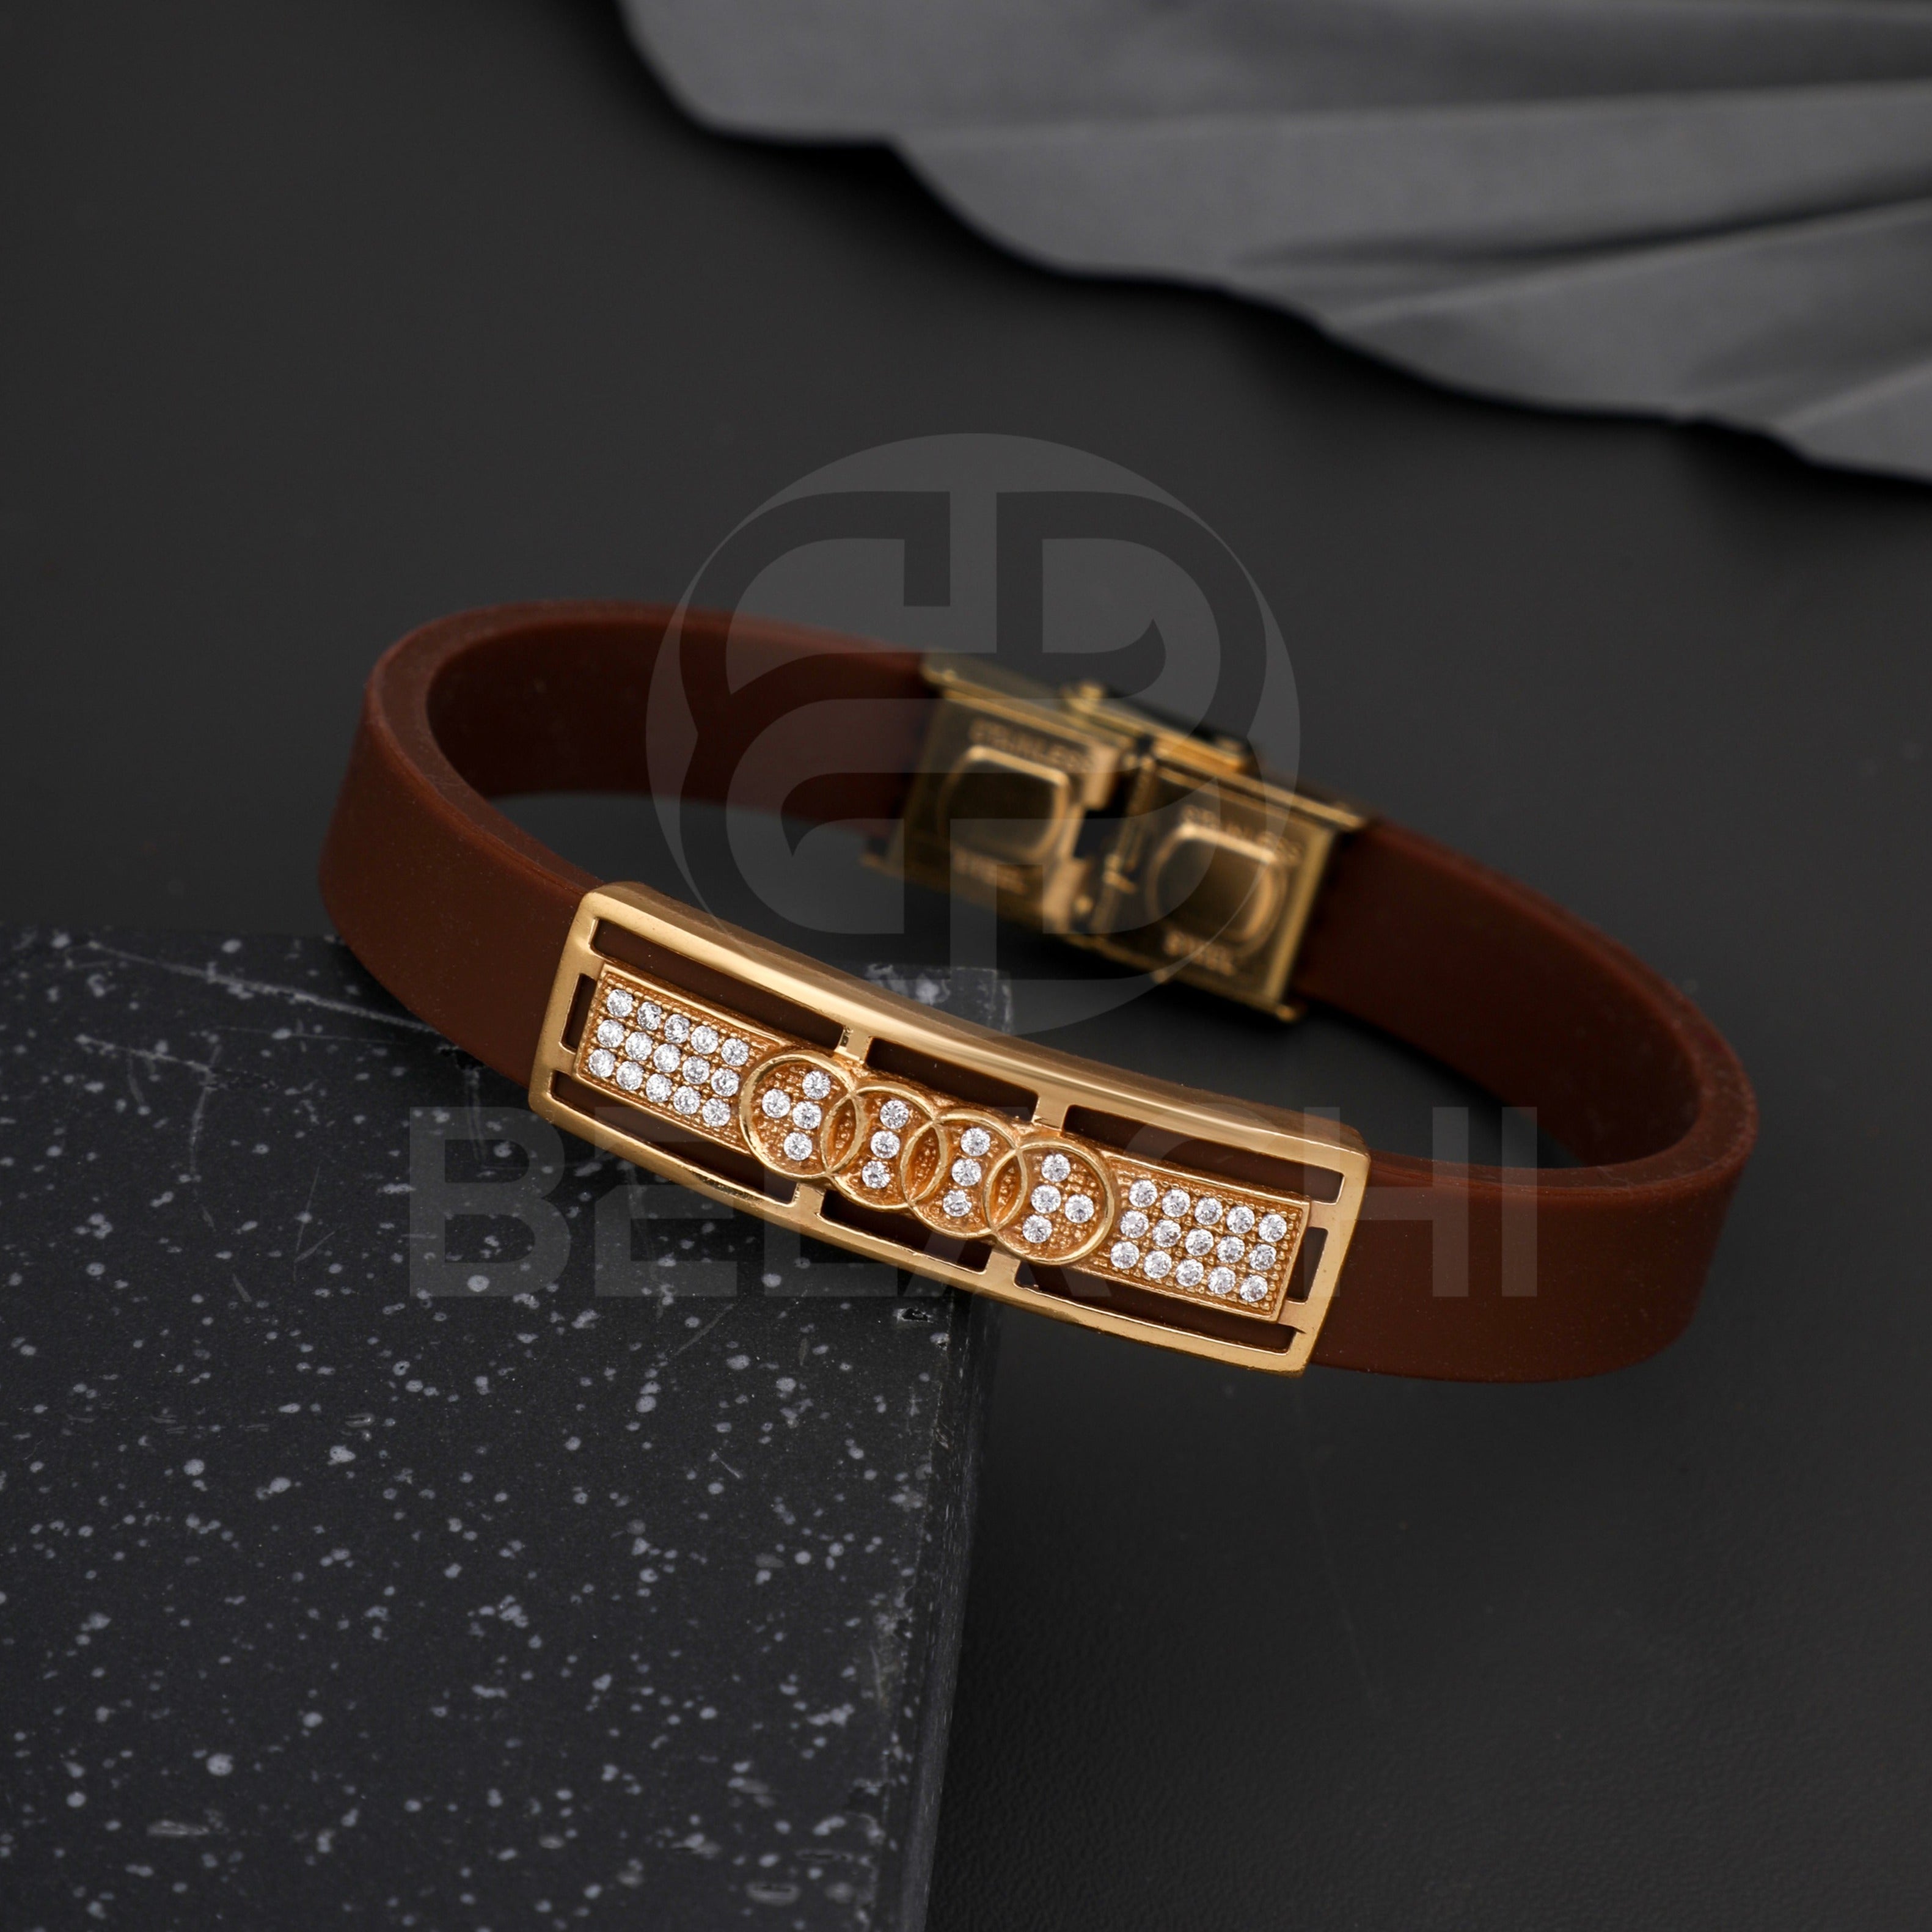 nilkanth Leather, Stainless Steel Diamond Gold-plated Bracelet Price in  India - Buy nilkanth Leather, Stainless Steel Diamond Gold-plated Bracelet  Online at Best Prices in India | Flipkart.com